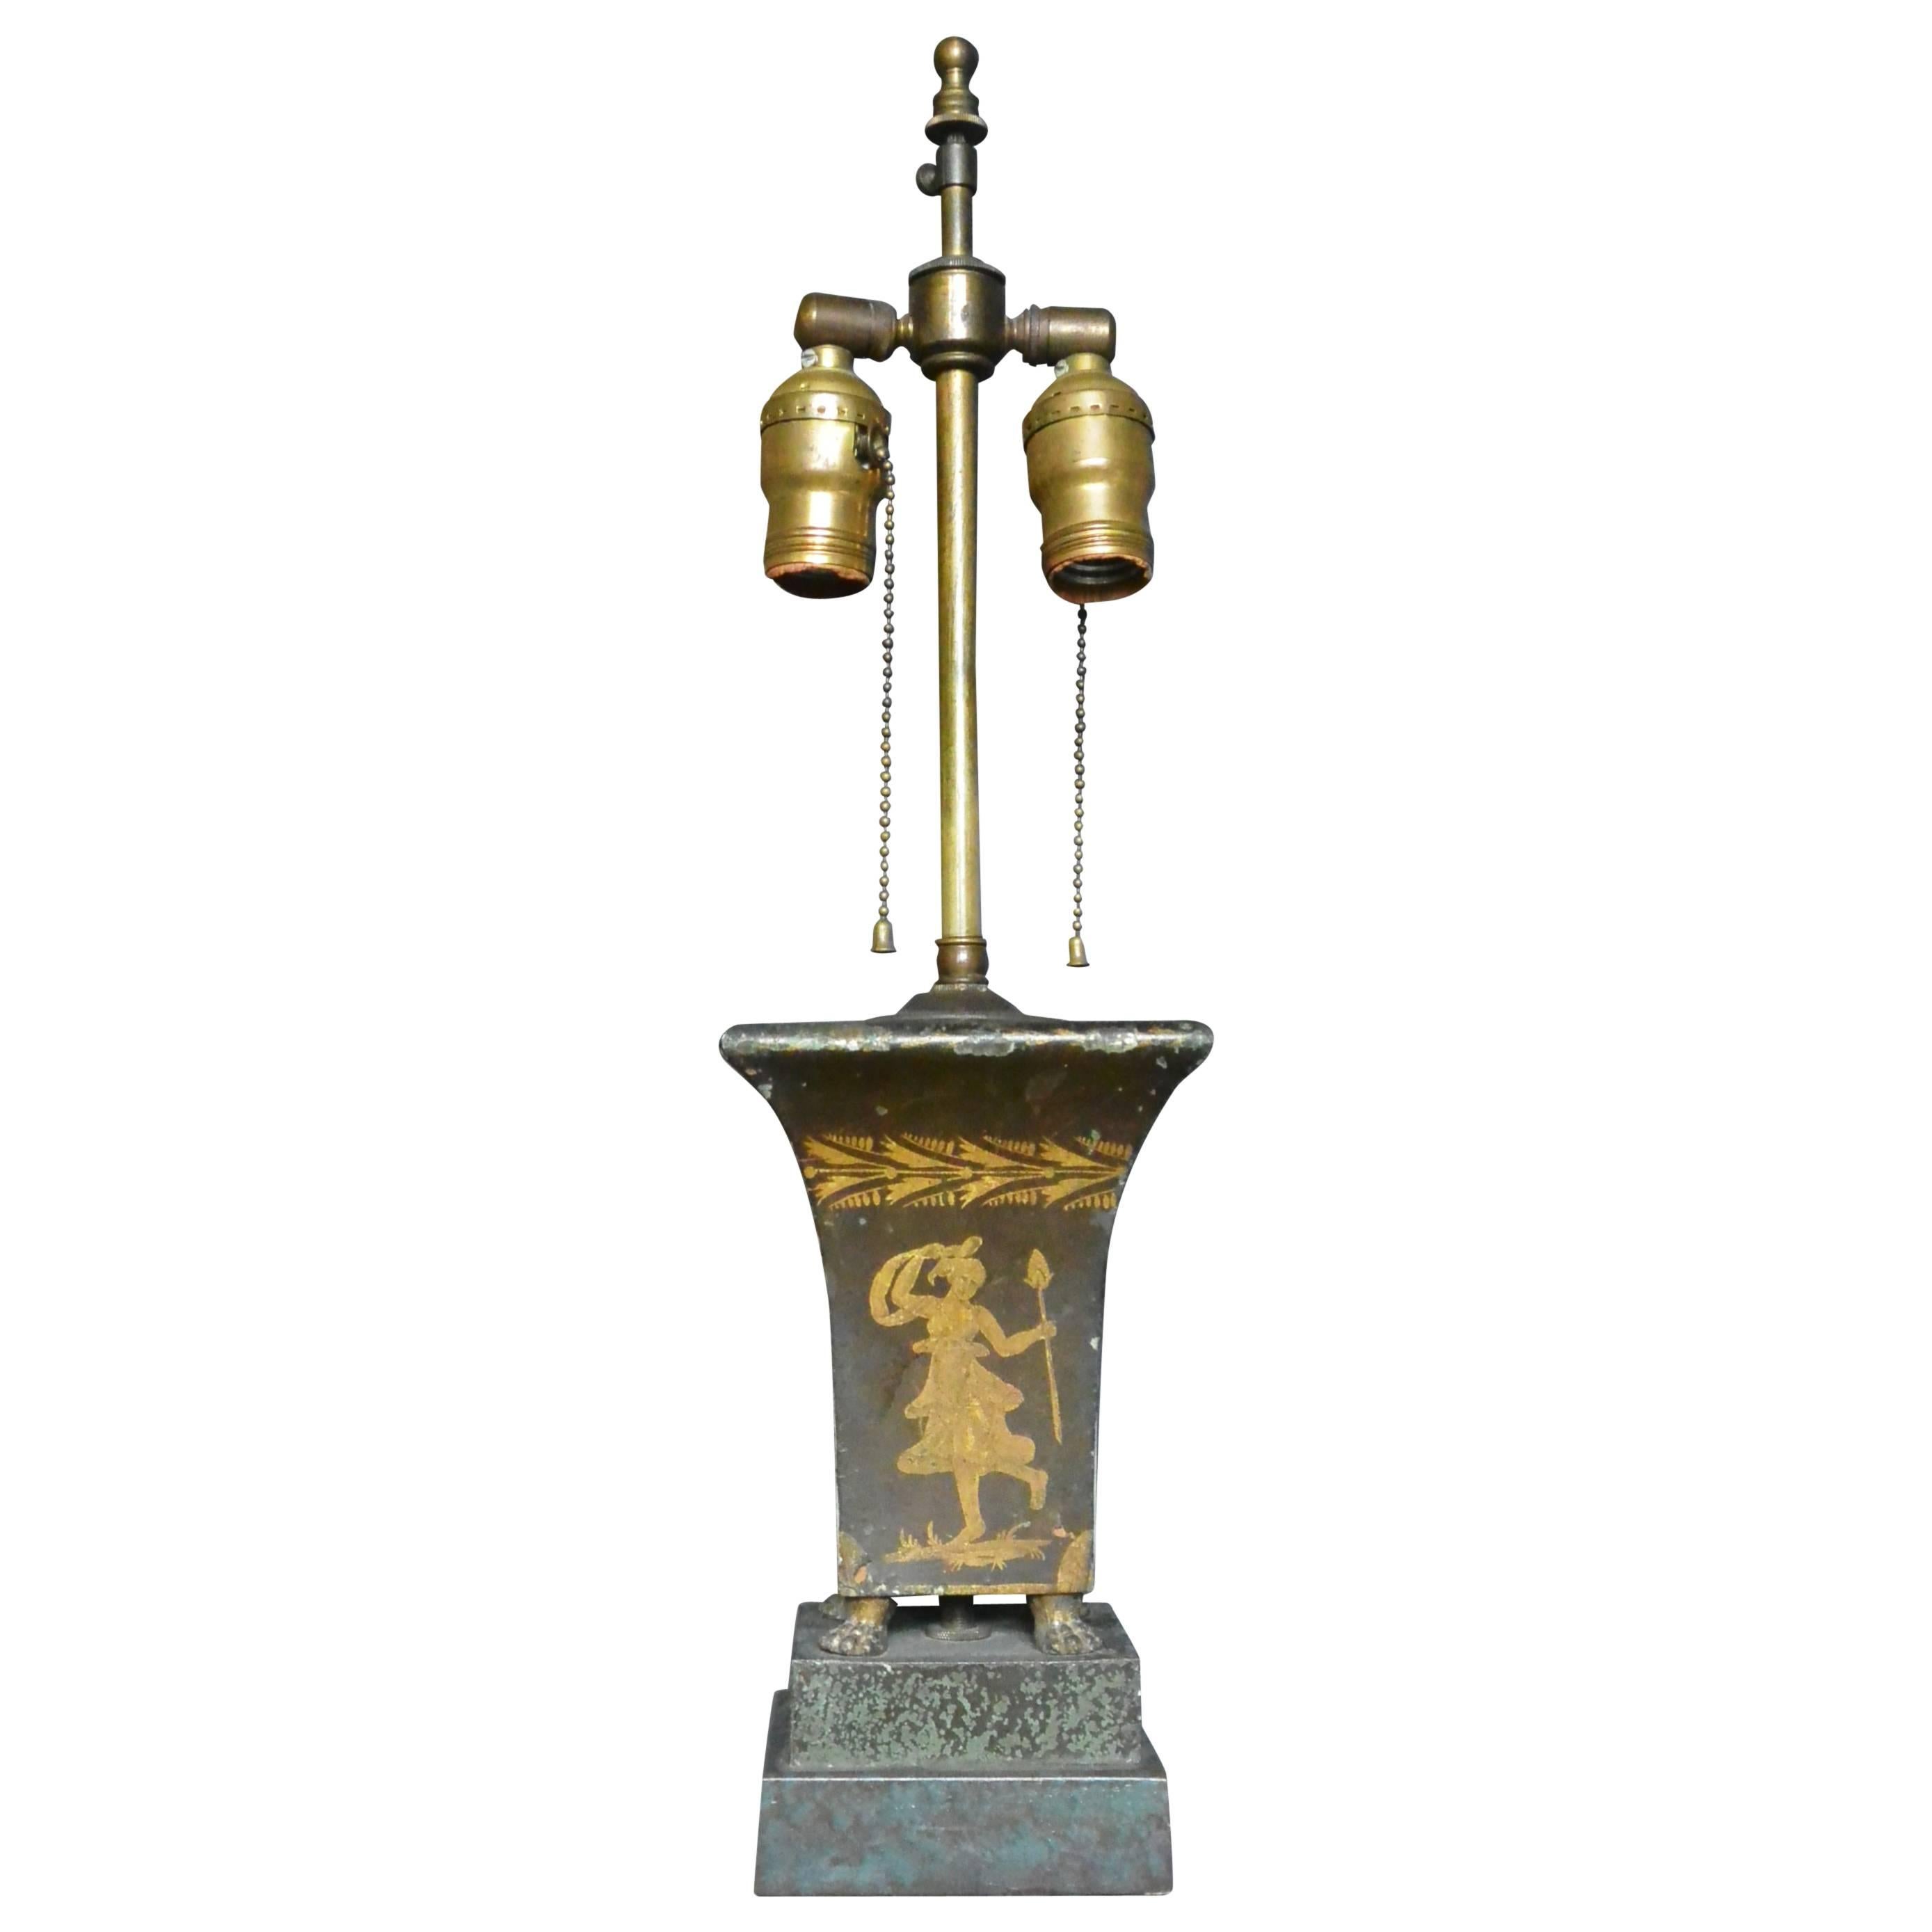 French tole jardiniere lamp.  Empire gilt painted brown tole jardiniere with paw feet on raised green faux marble platform, now converted to a lamp.  France, early 19th century. 
Dimension: 4.5